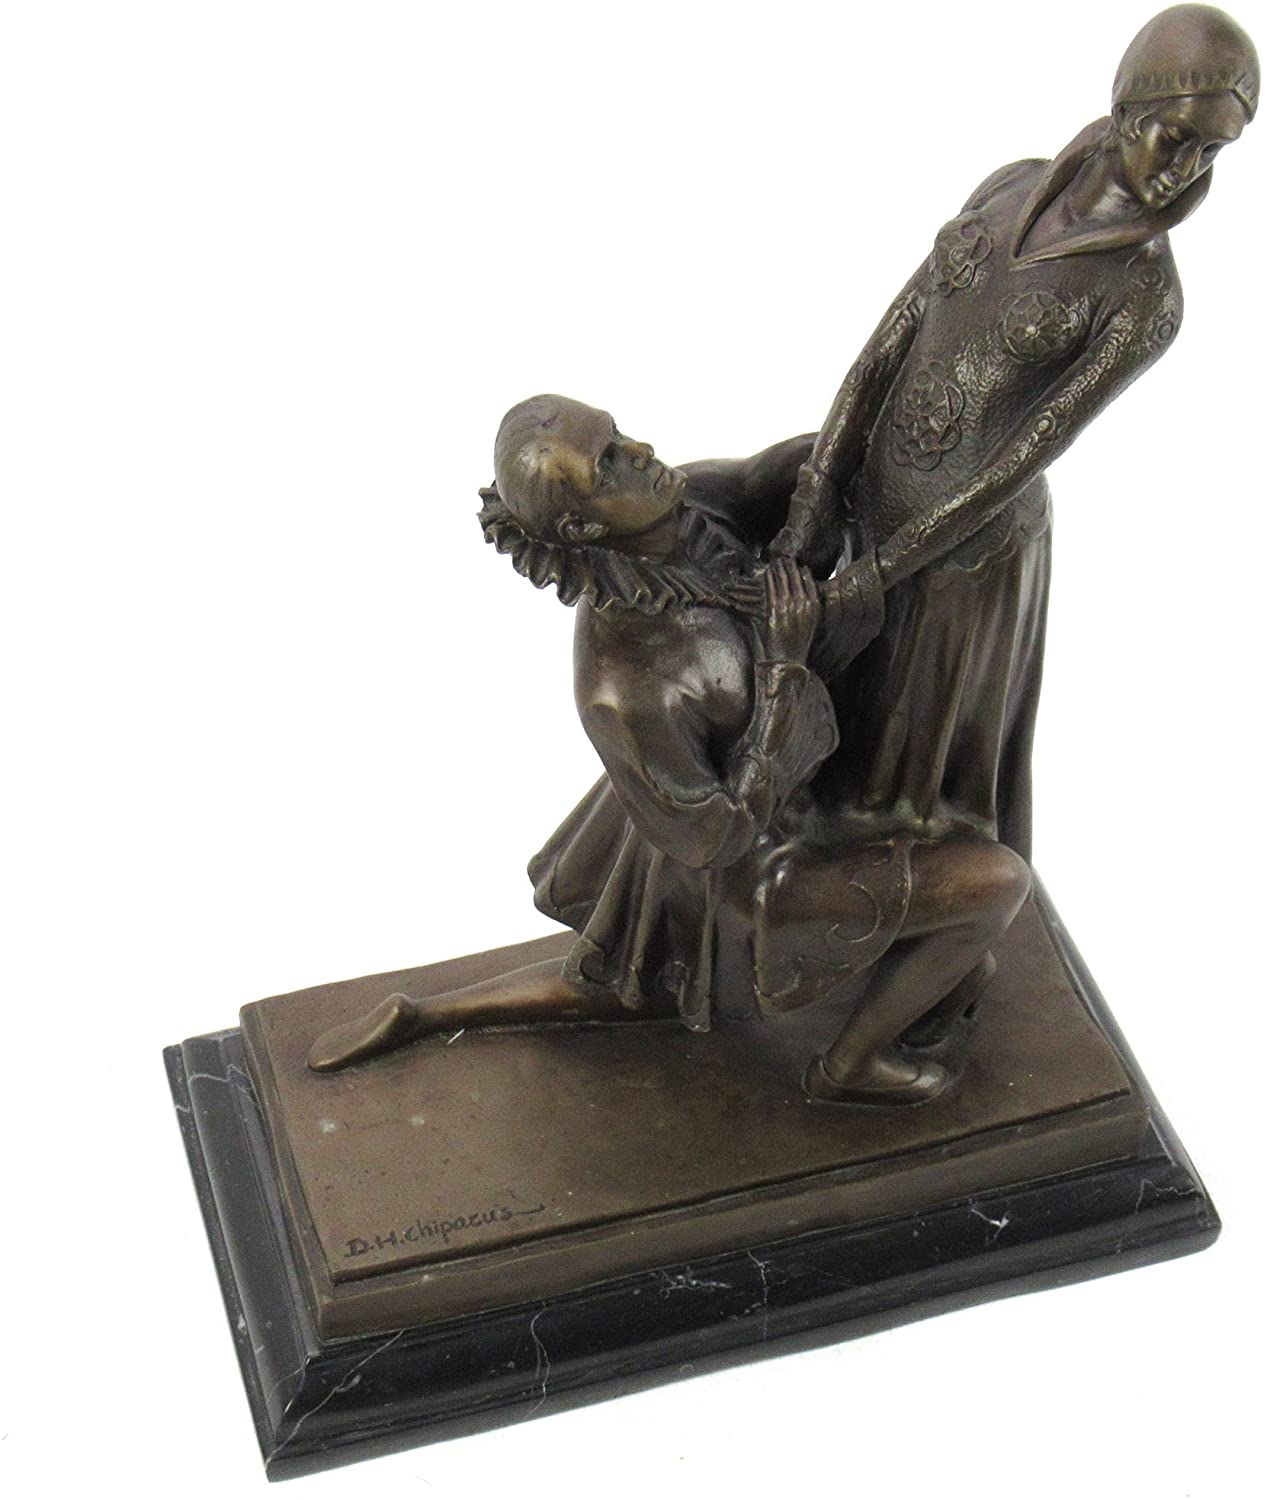 Proposal Bronze metal statue on marble base 10.5"wide X 5.5"deep X 13.5"tall - Royal Gift